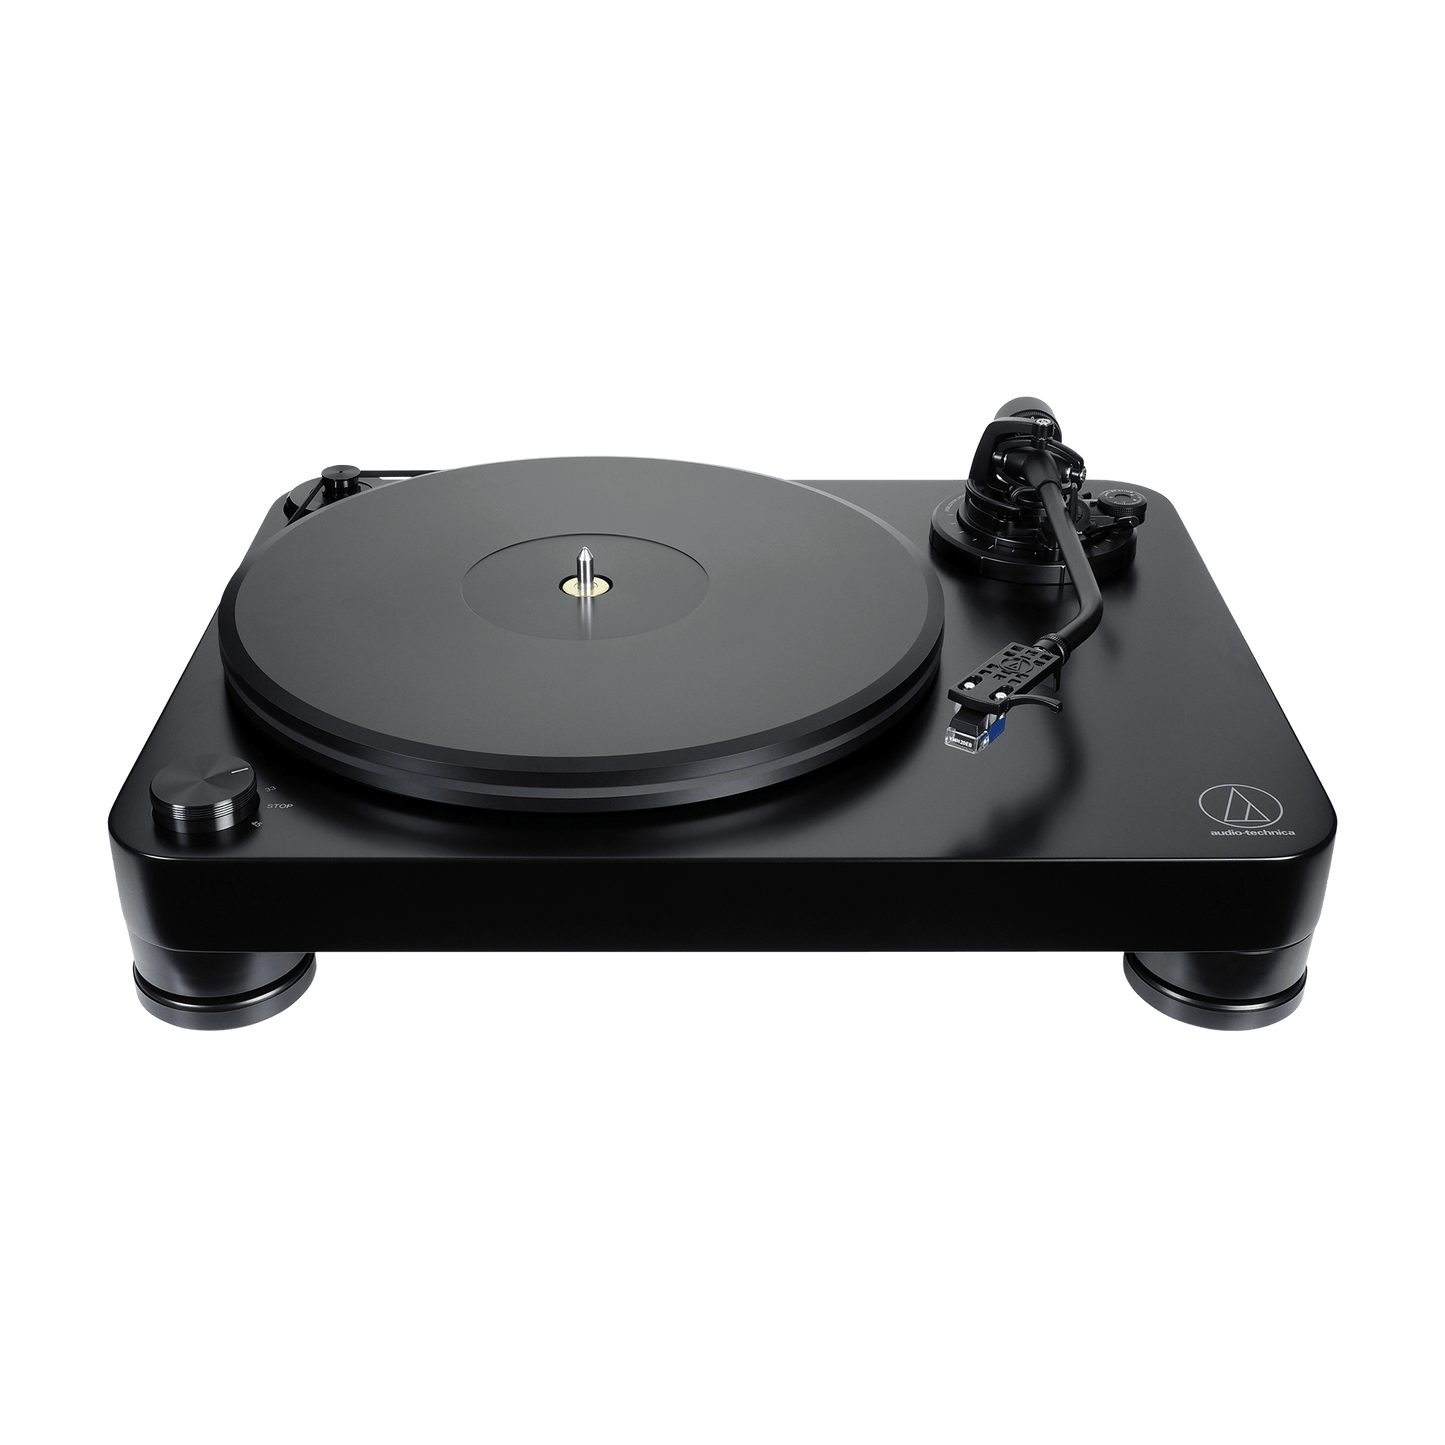 Audio-Technica AT-LP7 Turntable with built-in Phono